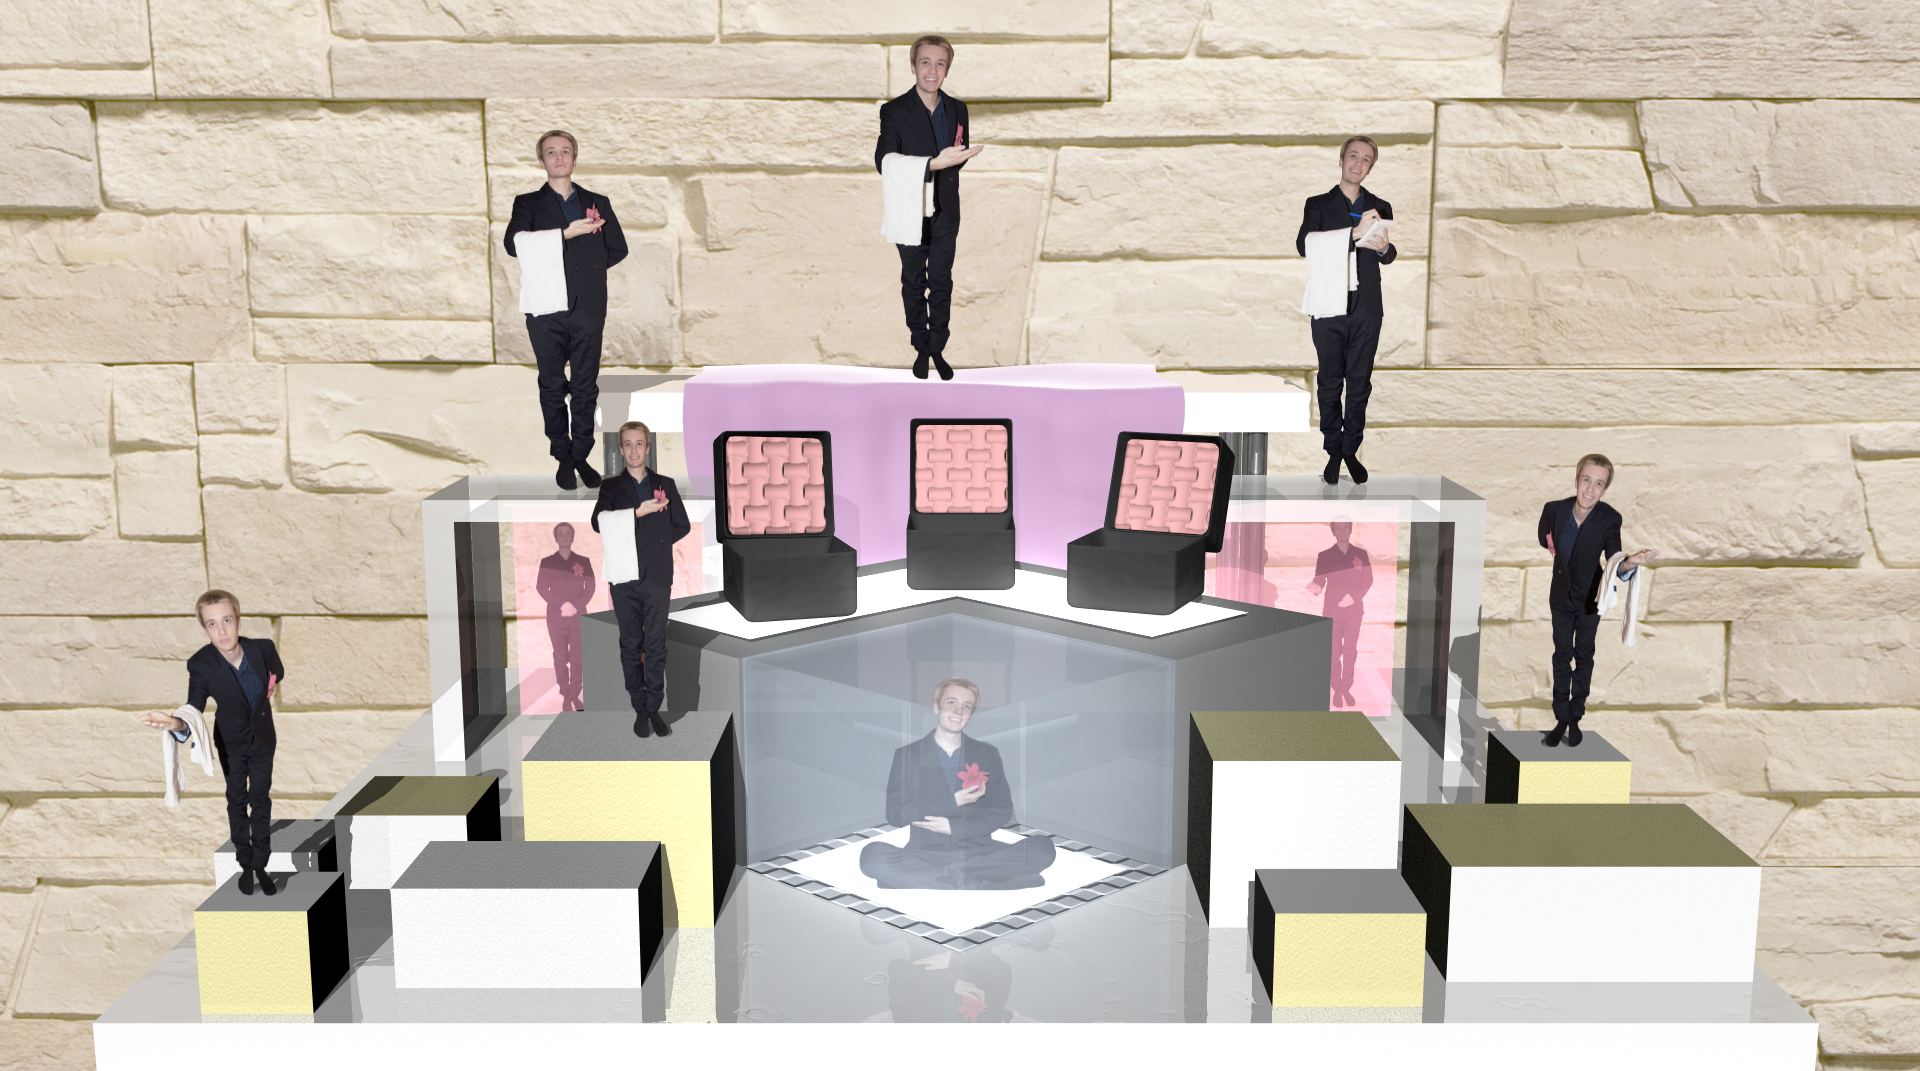 3D rendered image of a symmetrical jewelry display with 9 small butlers on it in various bowing poses.